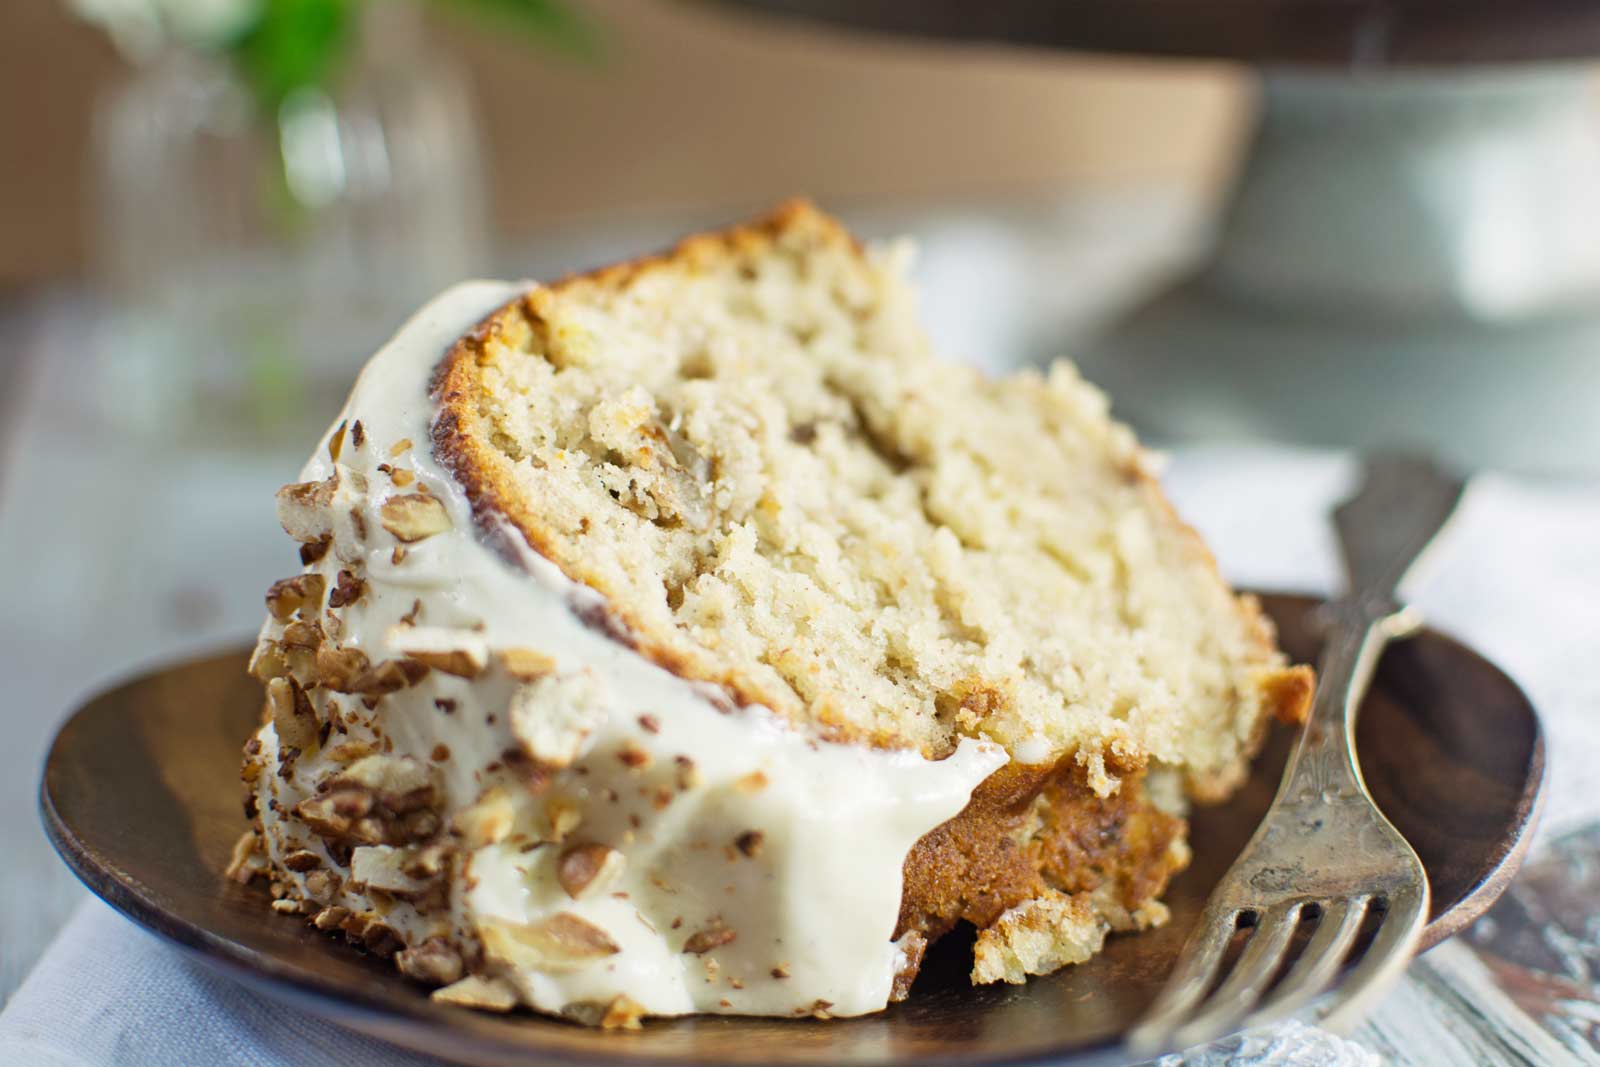 Hummingbird Cake - A gorgeous cake full of Pineapple, Bananas and Pecans topped off with a fluffy Cream Cheese Frosting - recipe @LittleFiggyFood